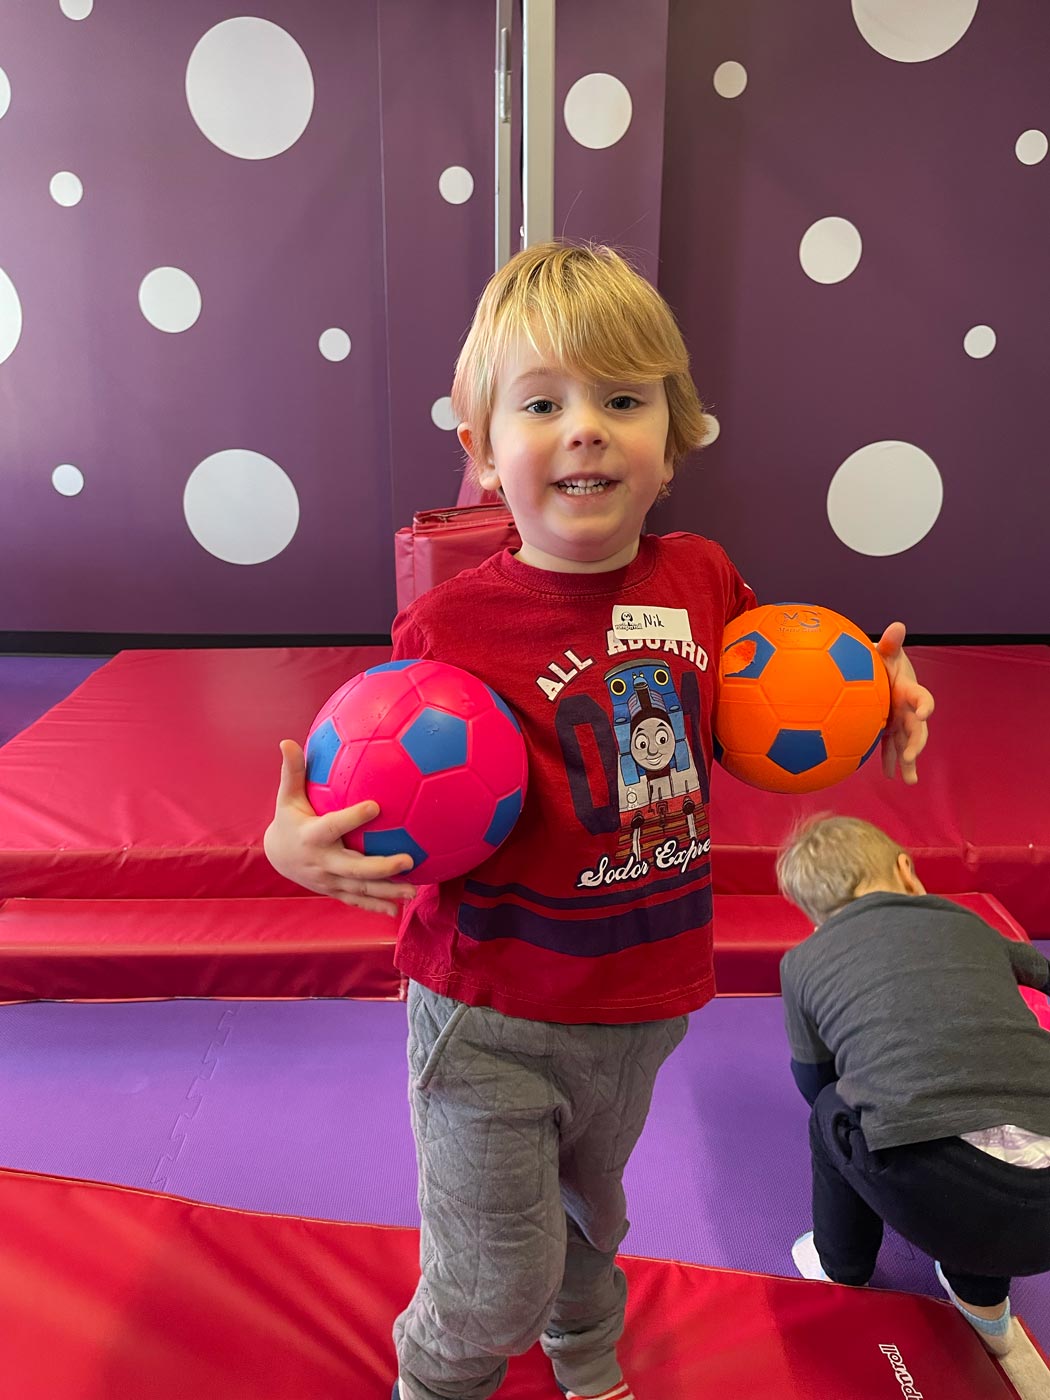 A little boy playing with soccer balls in Romp n' Roll Northwest Charlotte's gym.